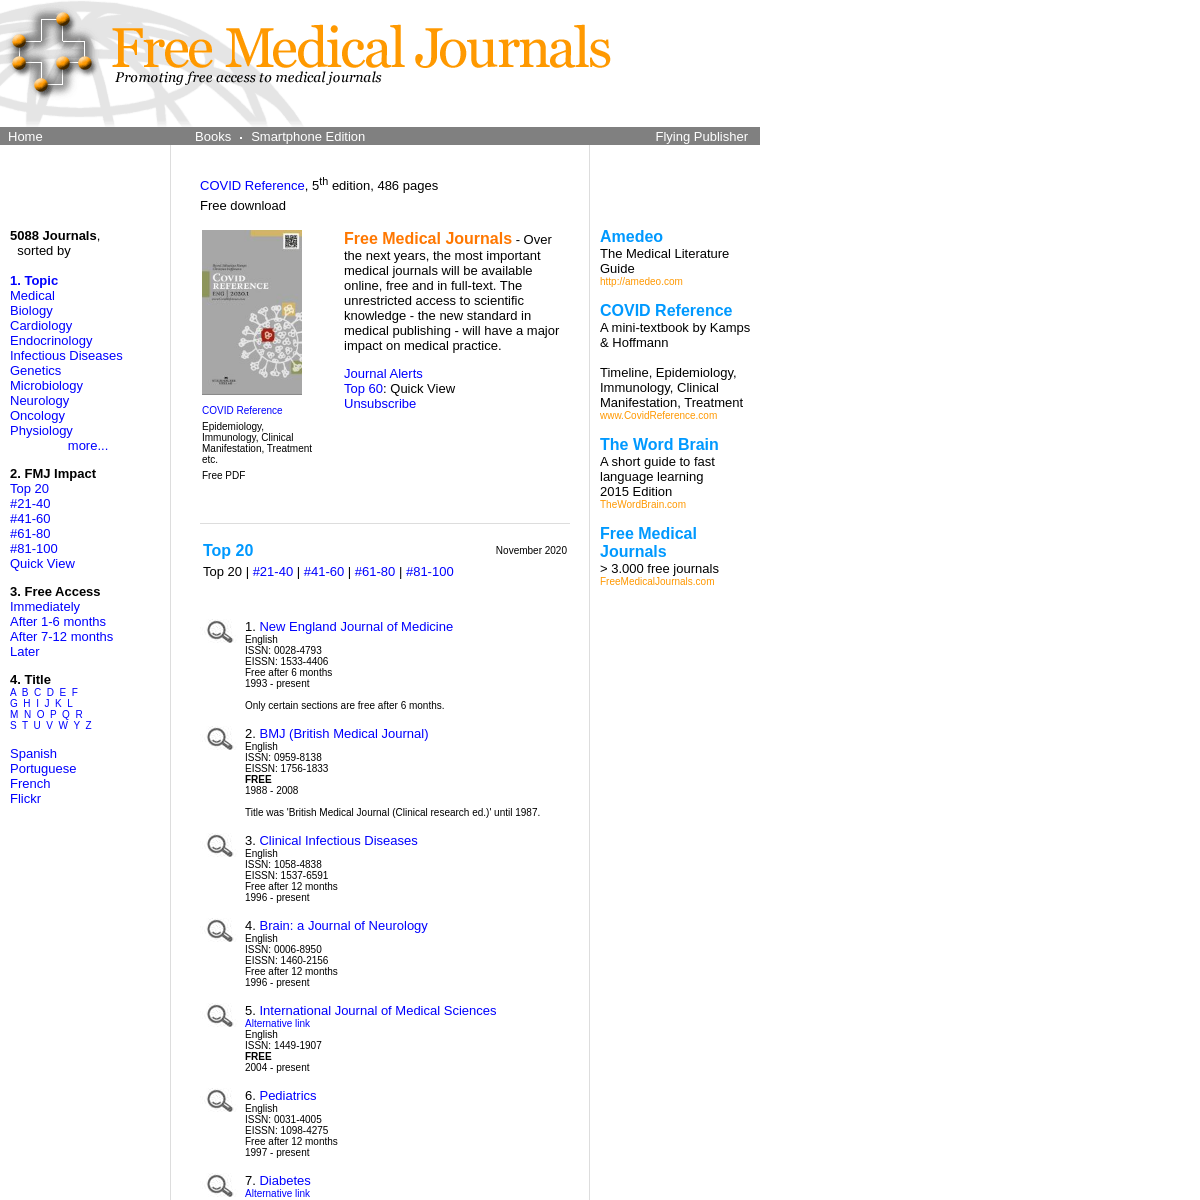 A complete backup of freemedicaljournals.com